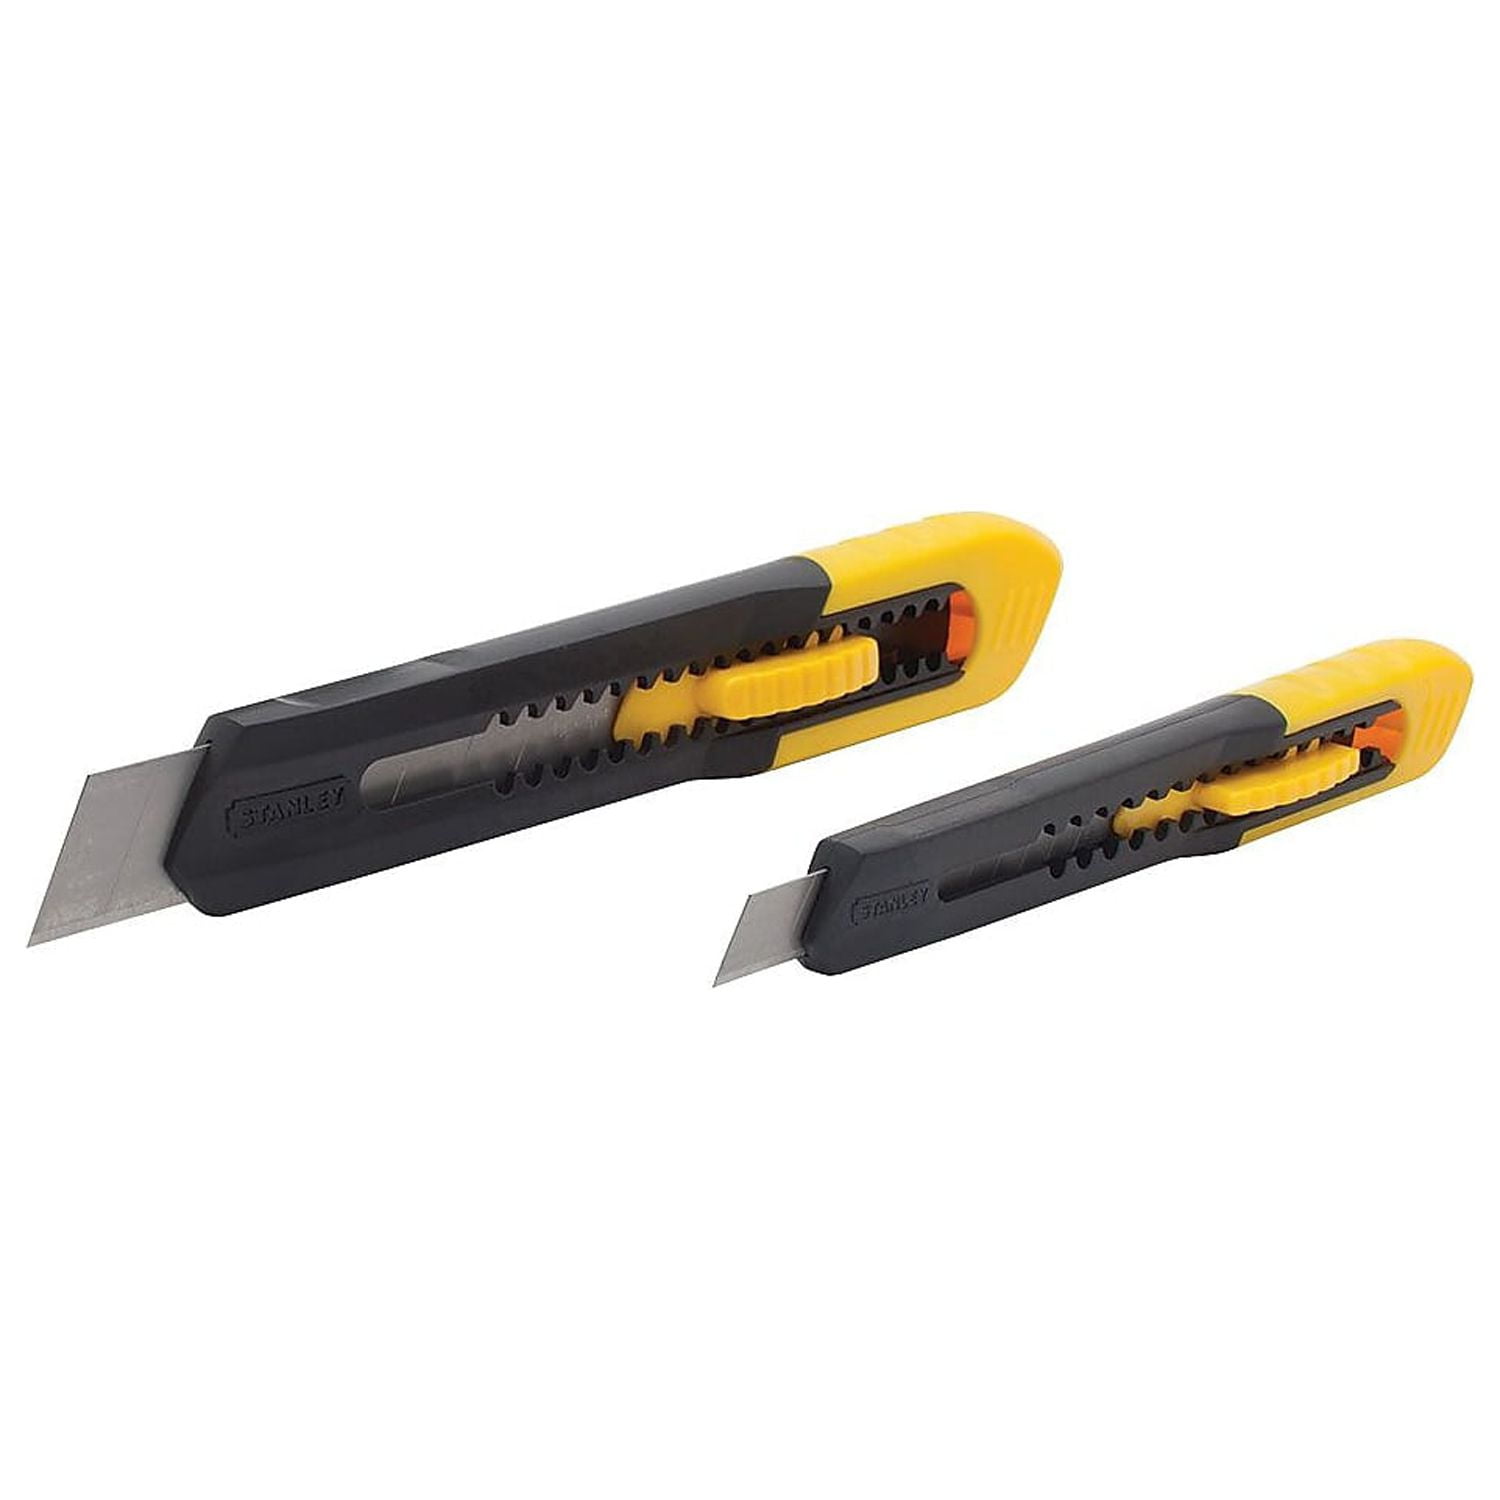 WOT-NOTS Utility Knife Blades - 18mm Snap Off - Pack of 10